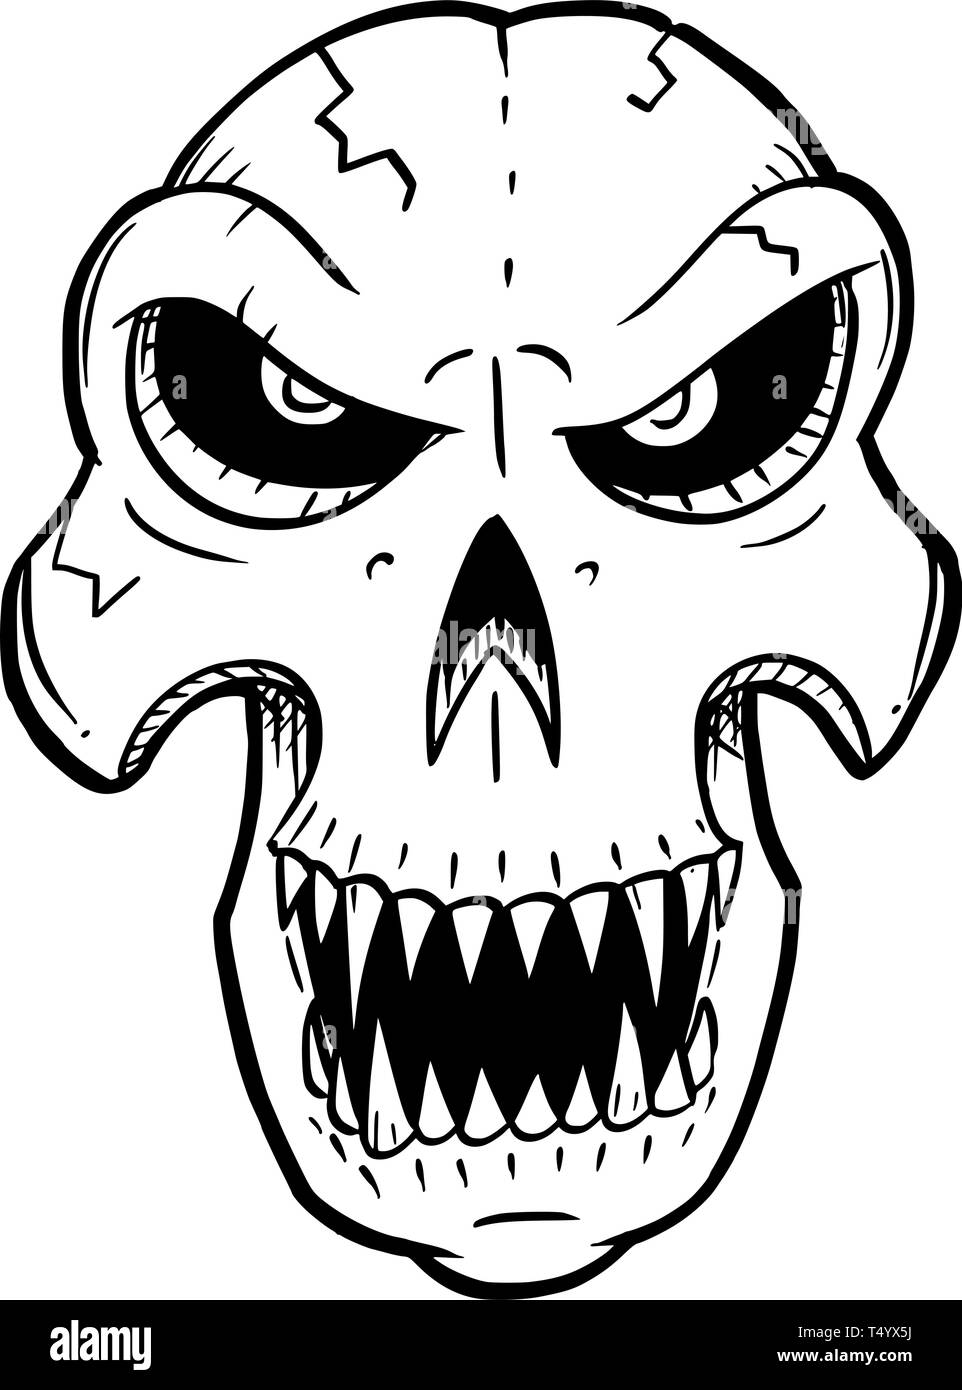 Cartoon drawing conceptual illustration of angry monster skull with sharp teeth looking front. Stock Vector